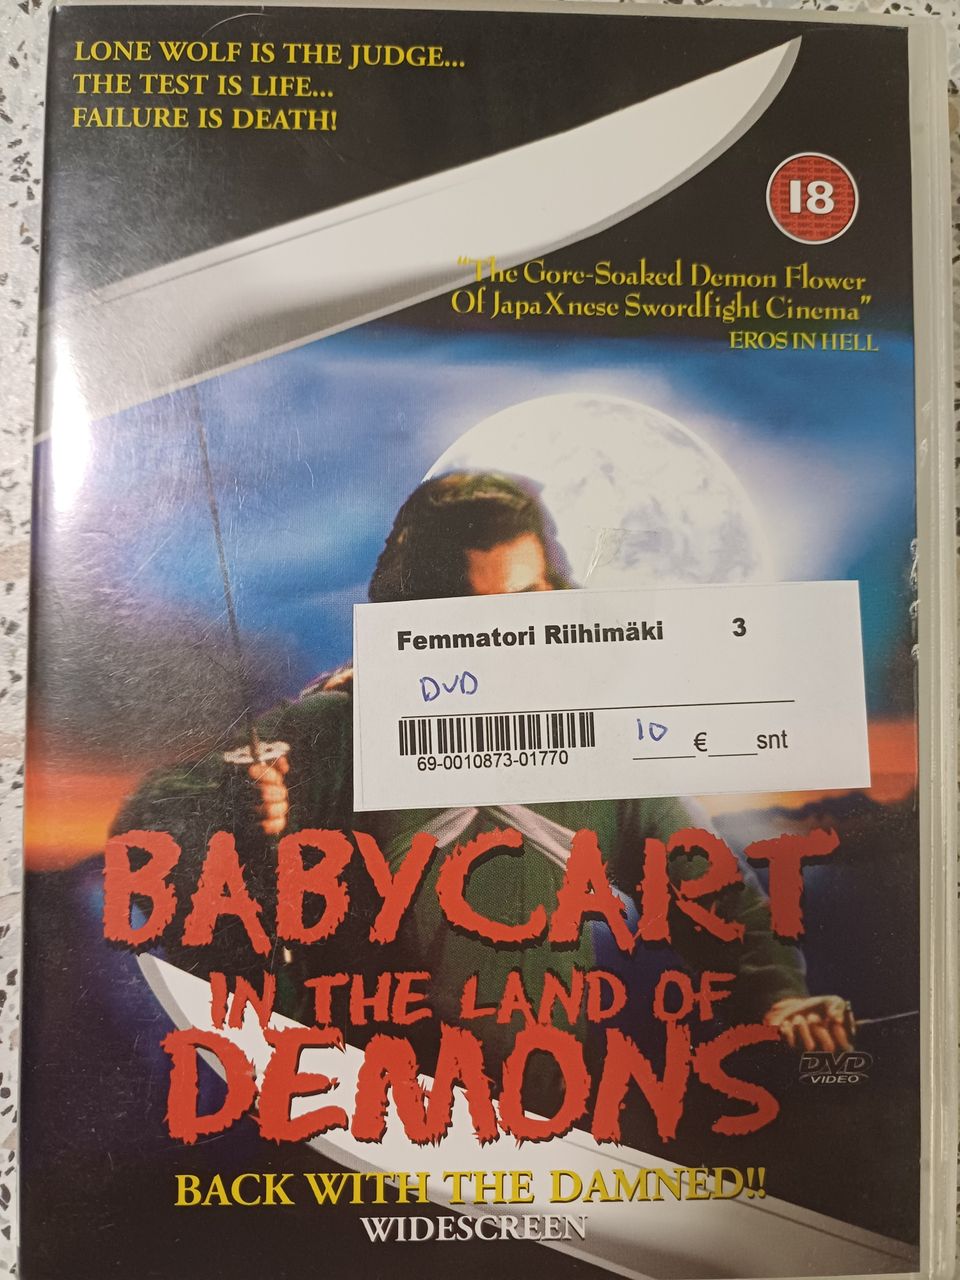 Baby Cart: In the Land of Demons